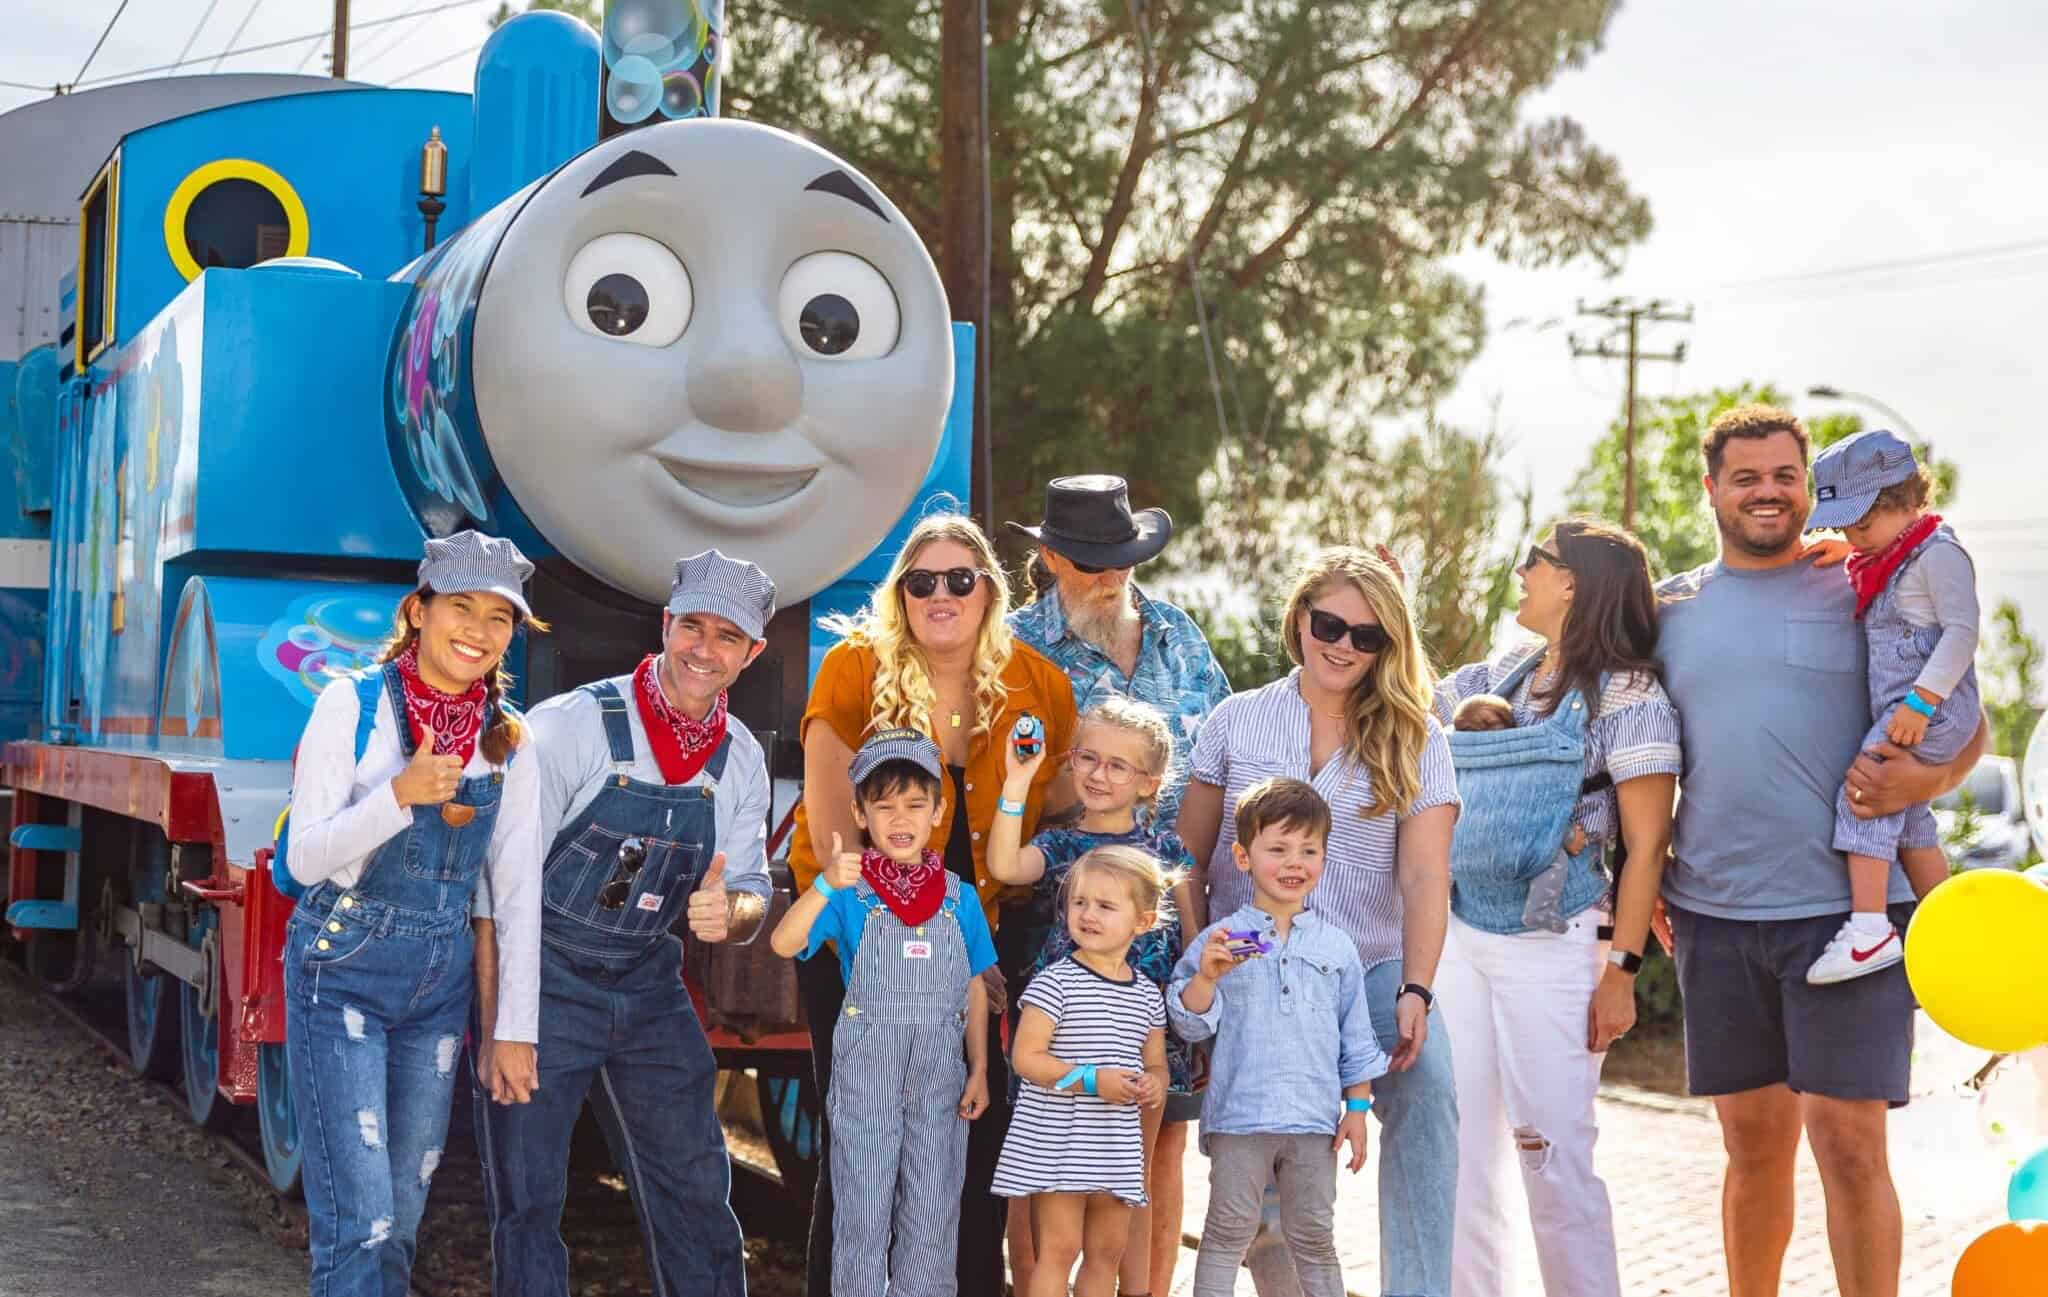 Group of passengers standing with Thomas